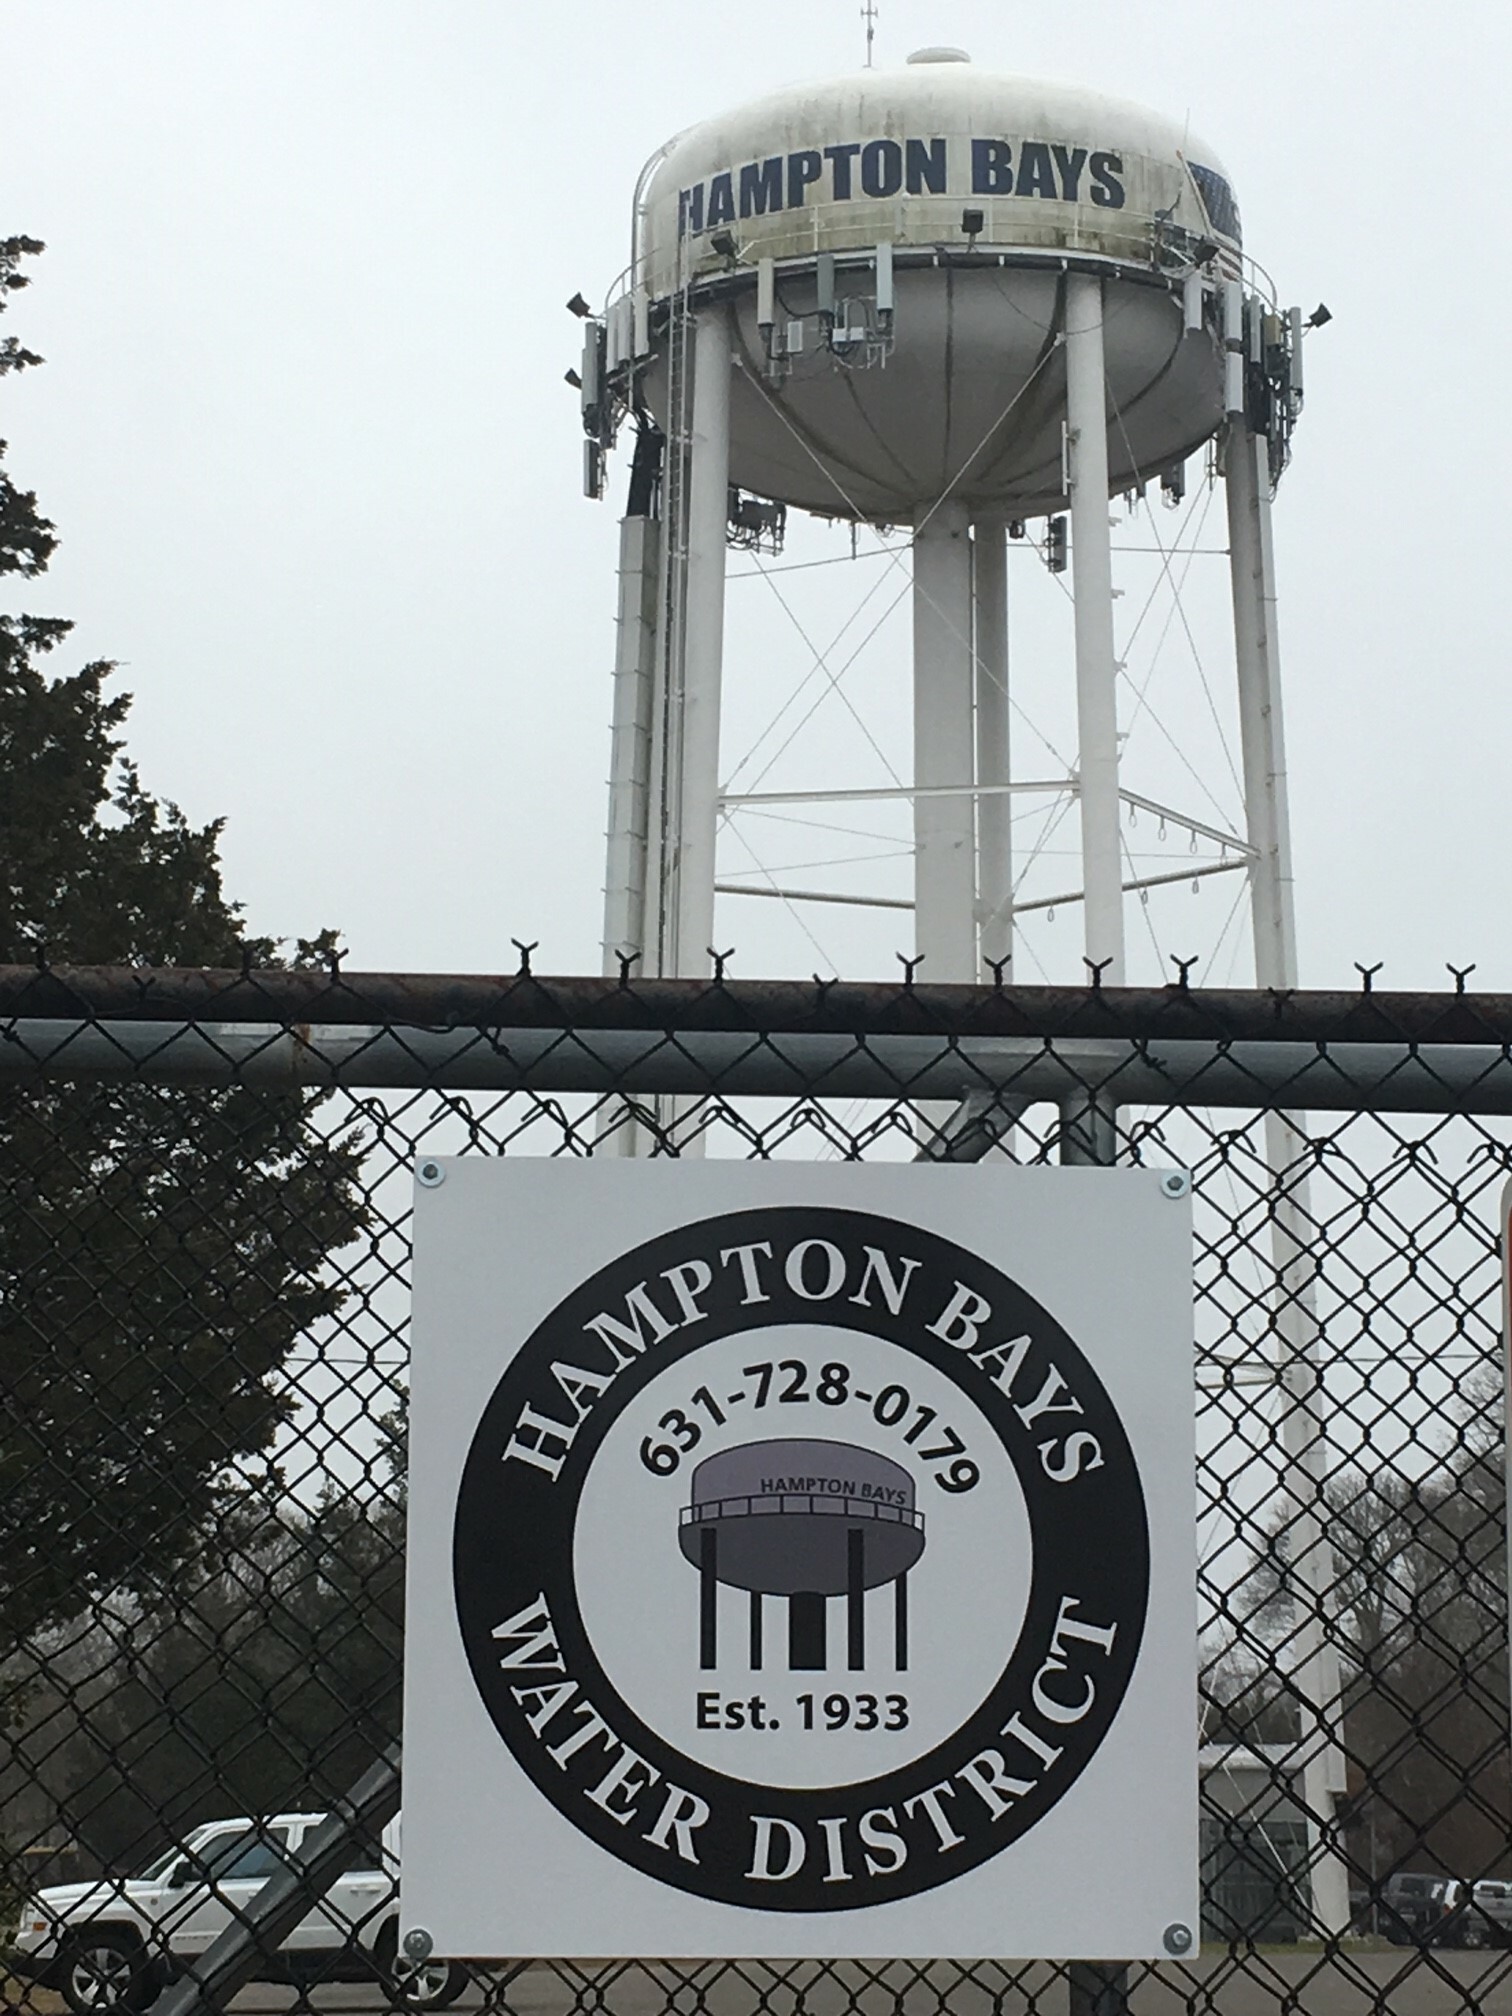 Southampton Town Board members are poised to eye a comprehensive analysis of the Hampton Bays Water District. KITTY MERRILL